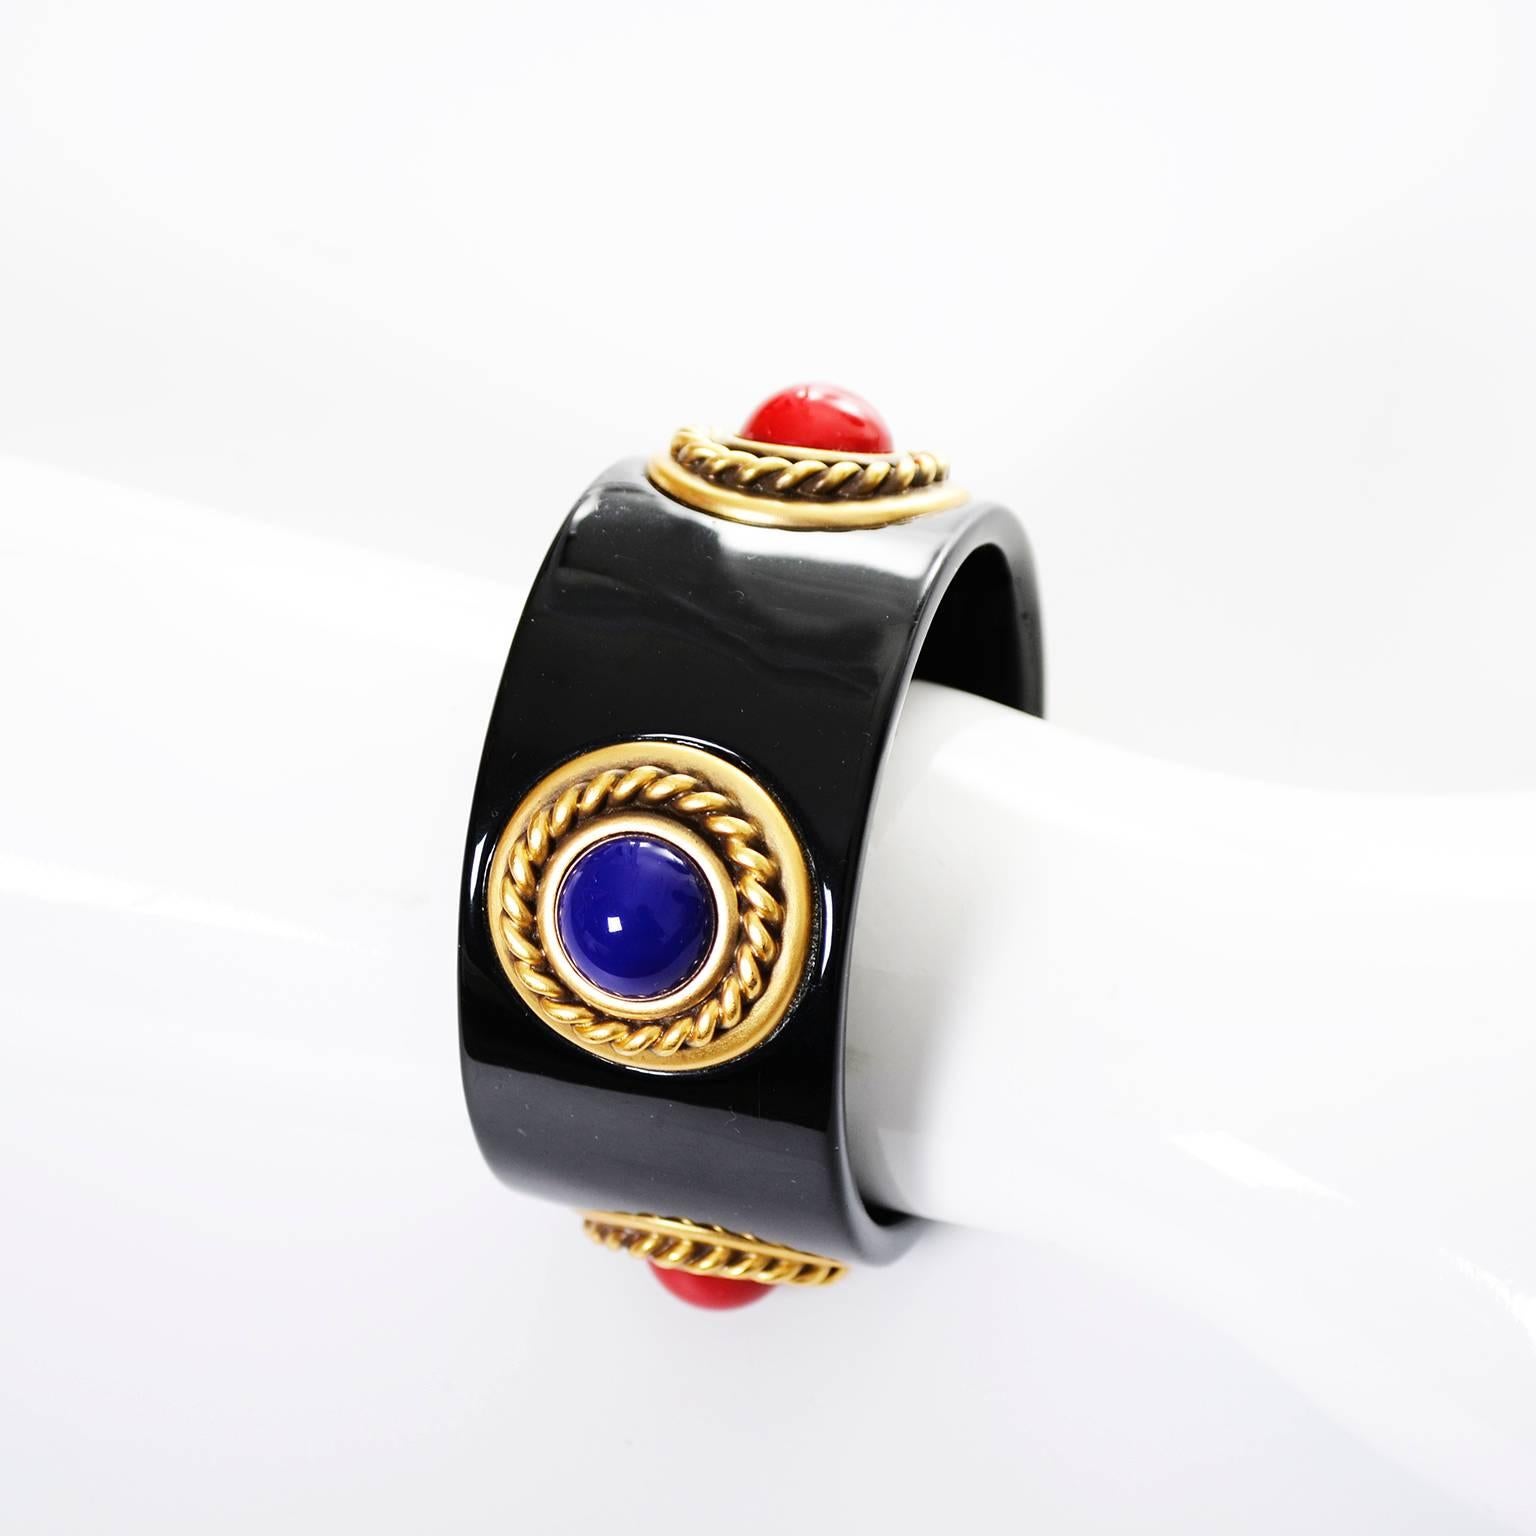 This is an incredible 1980s vintage bangle bracelet from YSL in black enamel with Multi colored cabochons set in braided gold plate metal.  This bracelet is 1 and 1/4 inch wide and measures 7 and 1/2 inches in circumference on the inside.  This